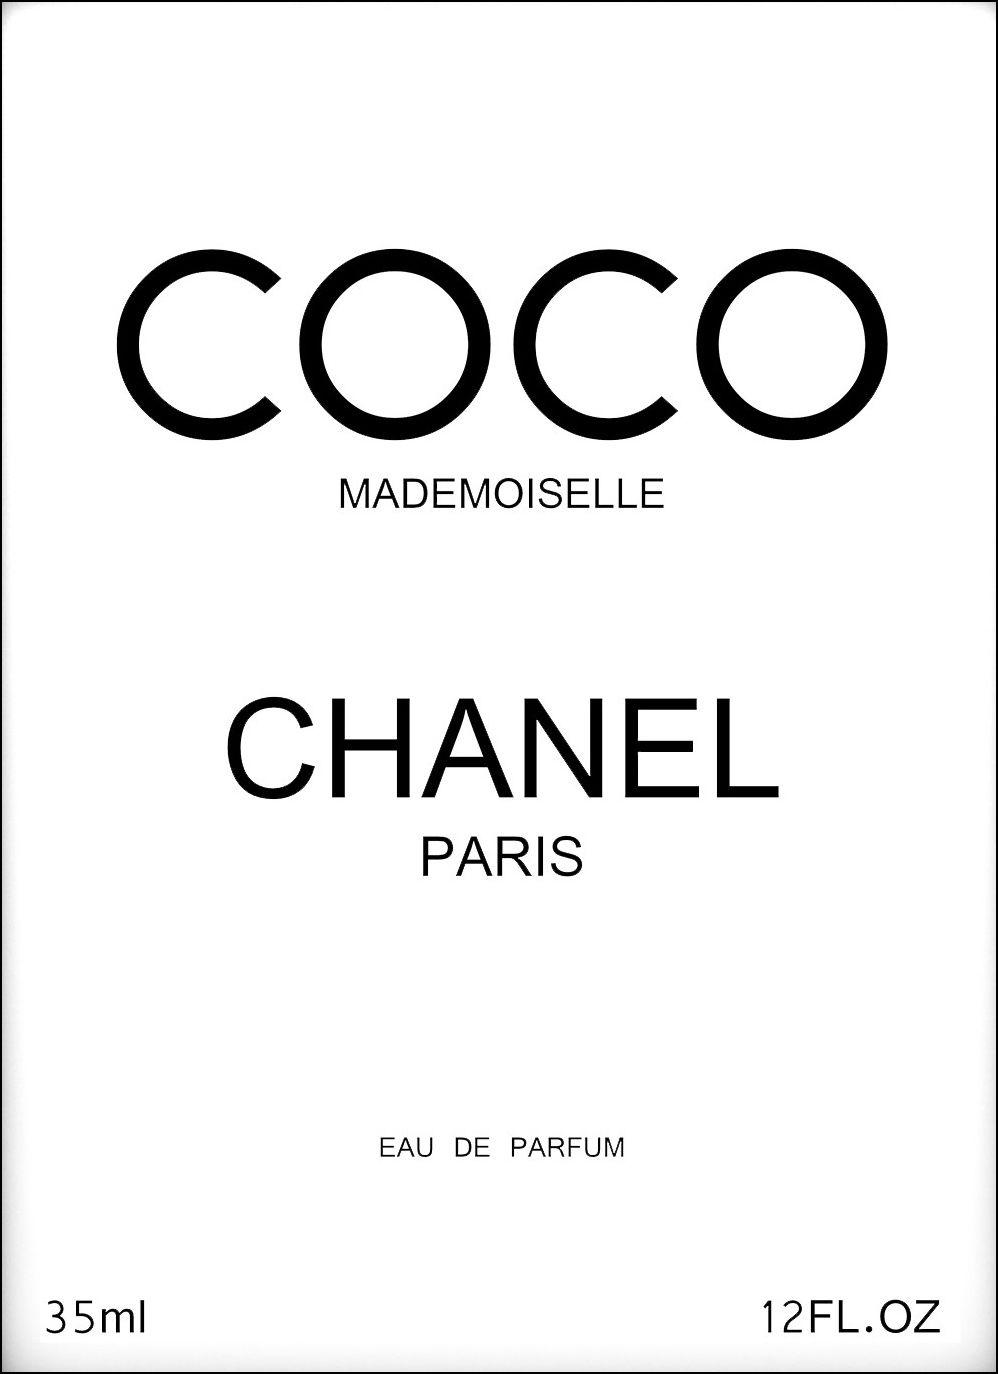 Coco Mademoiselle by Chanel  Fine Fragrance Collection